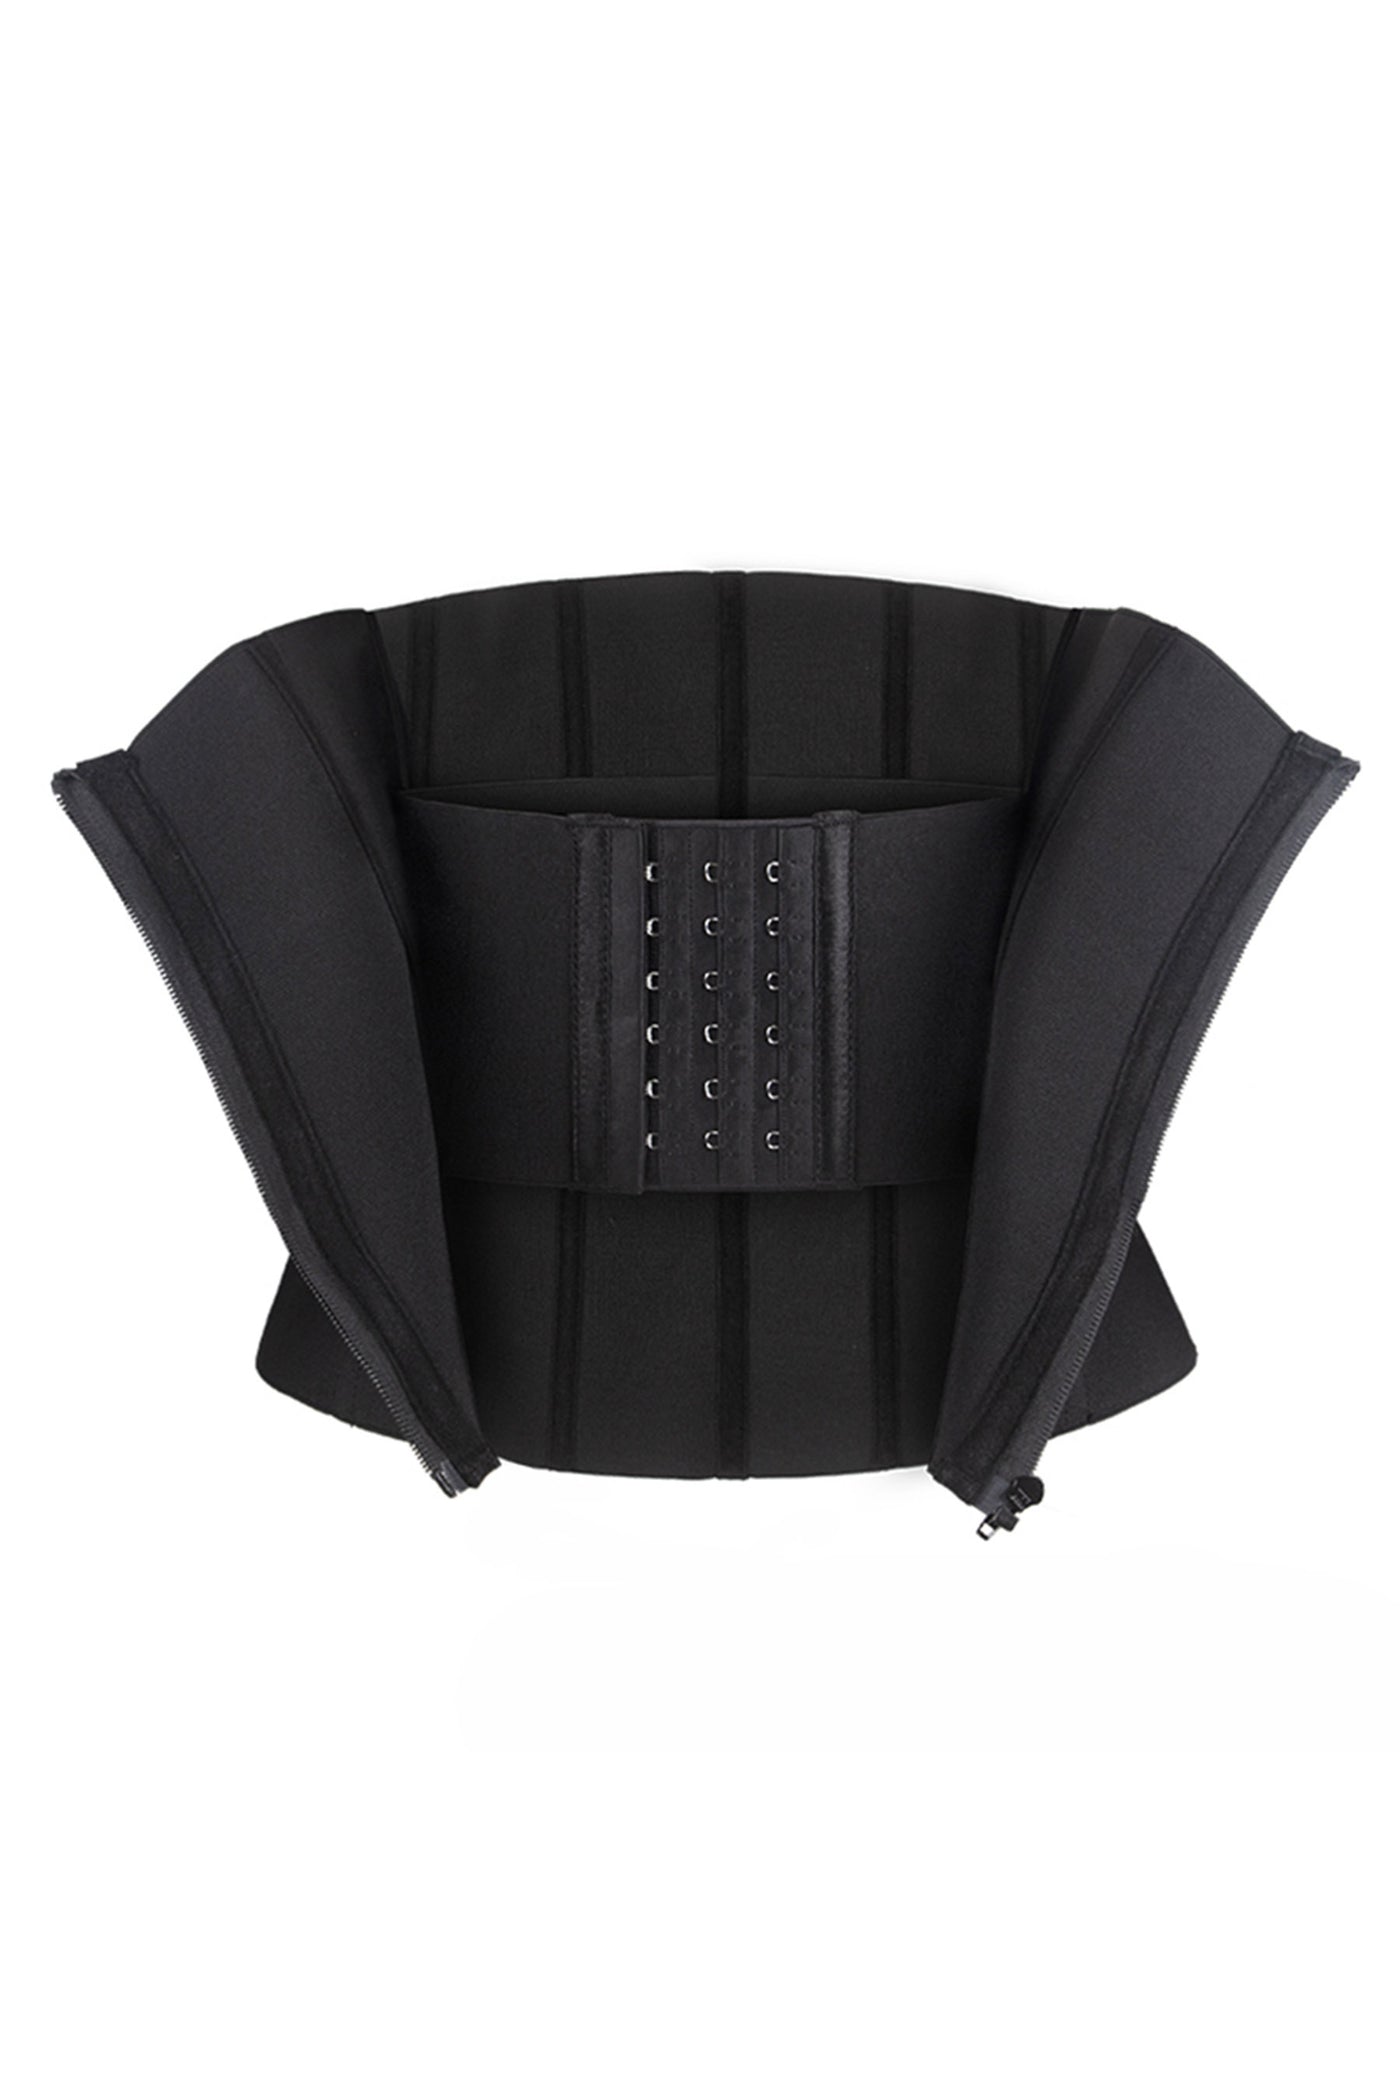 11 Inches Waist Trainer Wrap with Hooks